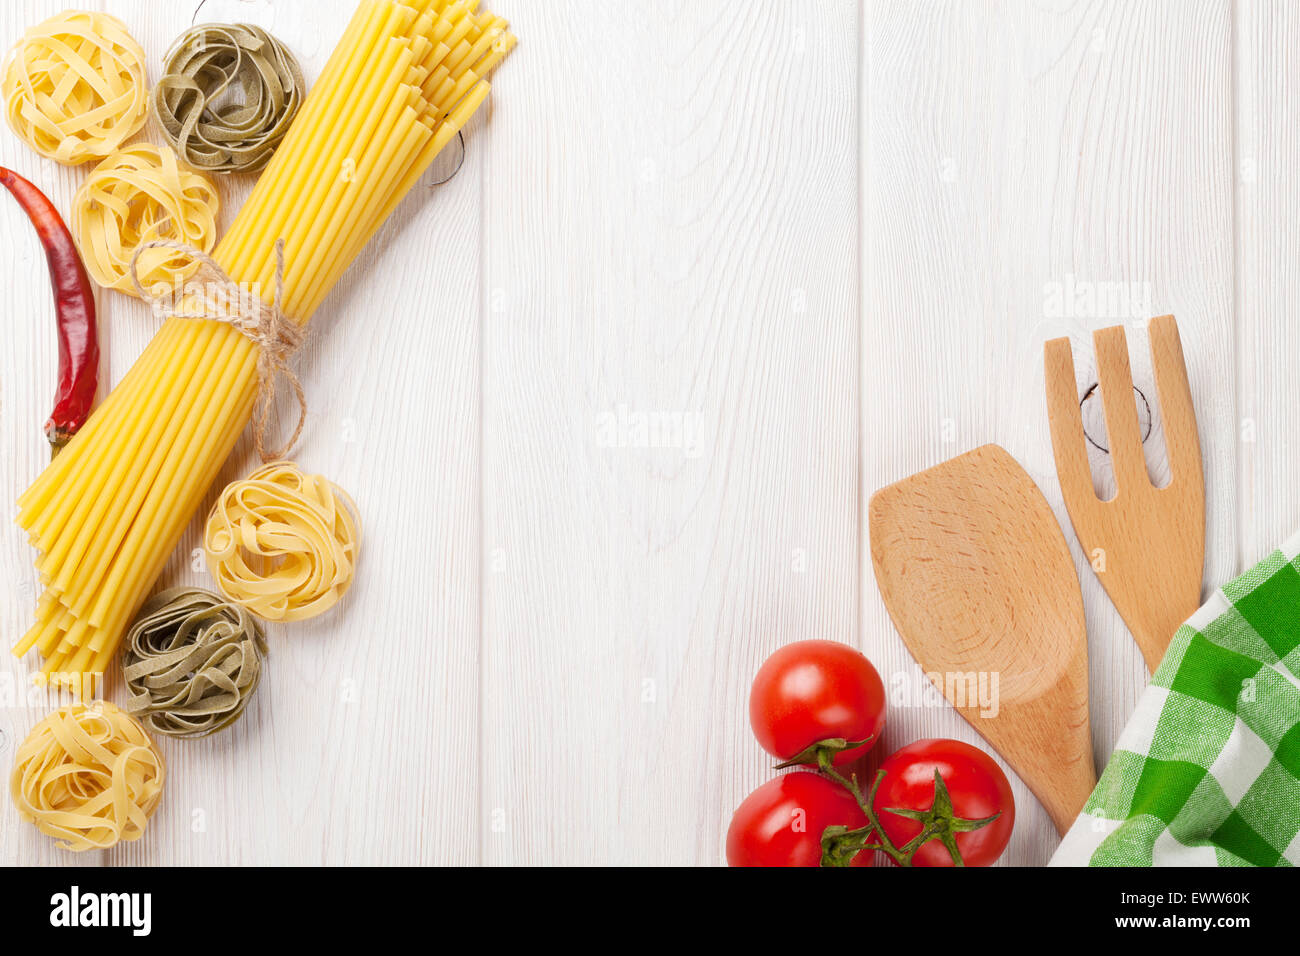 Italian food cooking ingredients. Pasta, vegetables, spices. Top view with copy space Stock Photo